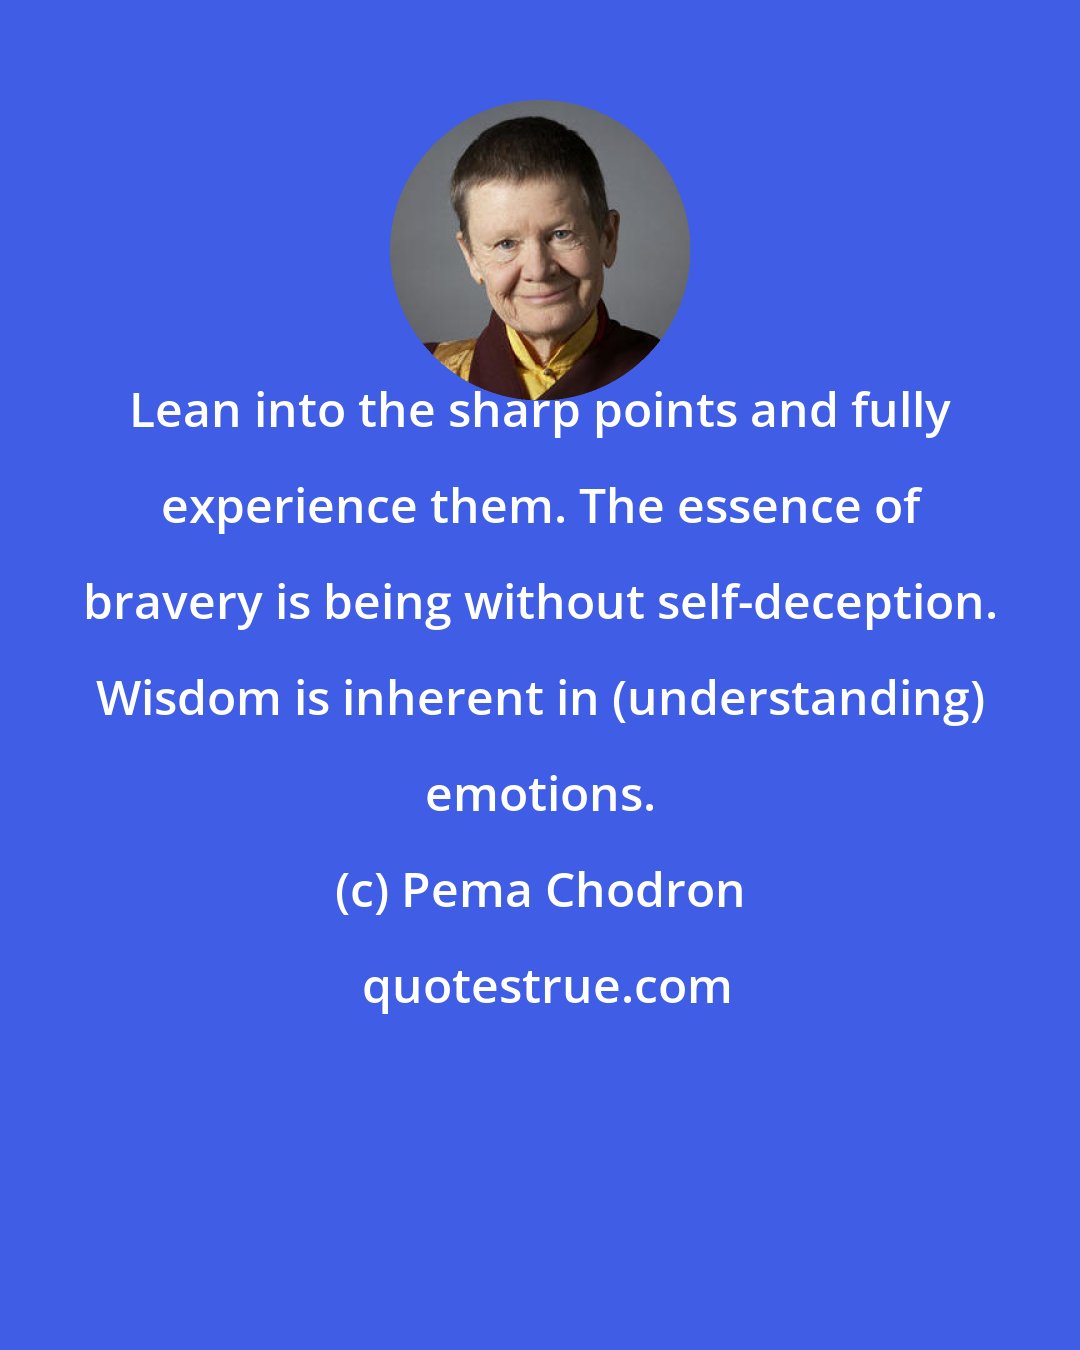 Pema Chodron: Lean into the sharp points and fully experience them. The essence of bravery is being without self-deception. Wisdom is inherent in (understanding) emotions.